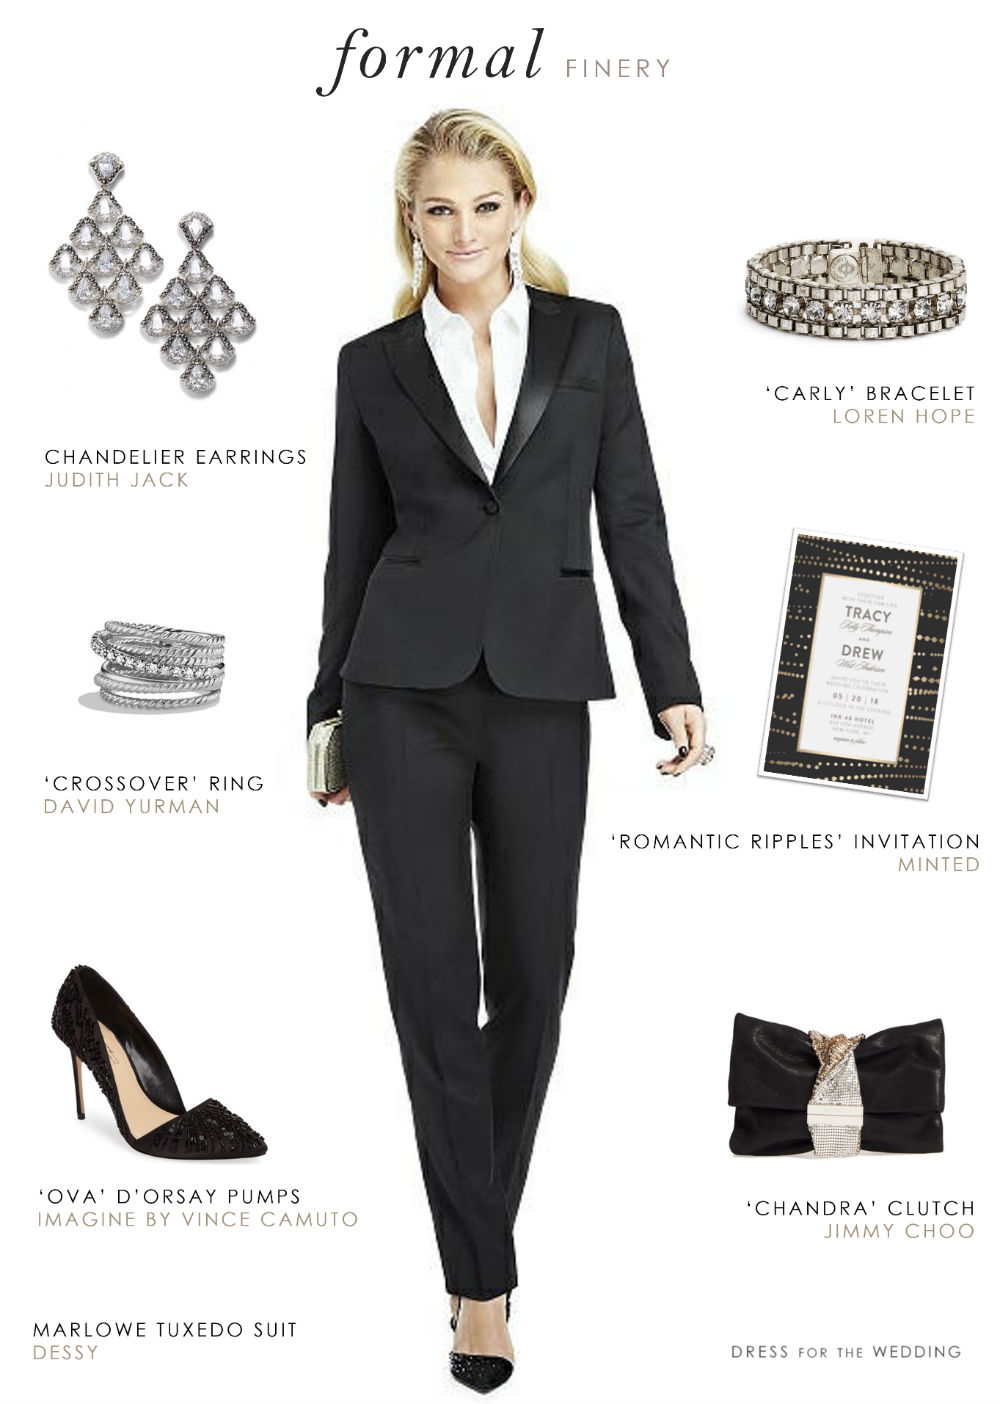 black tie event outfit for ladies